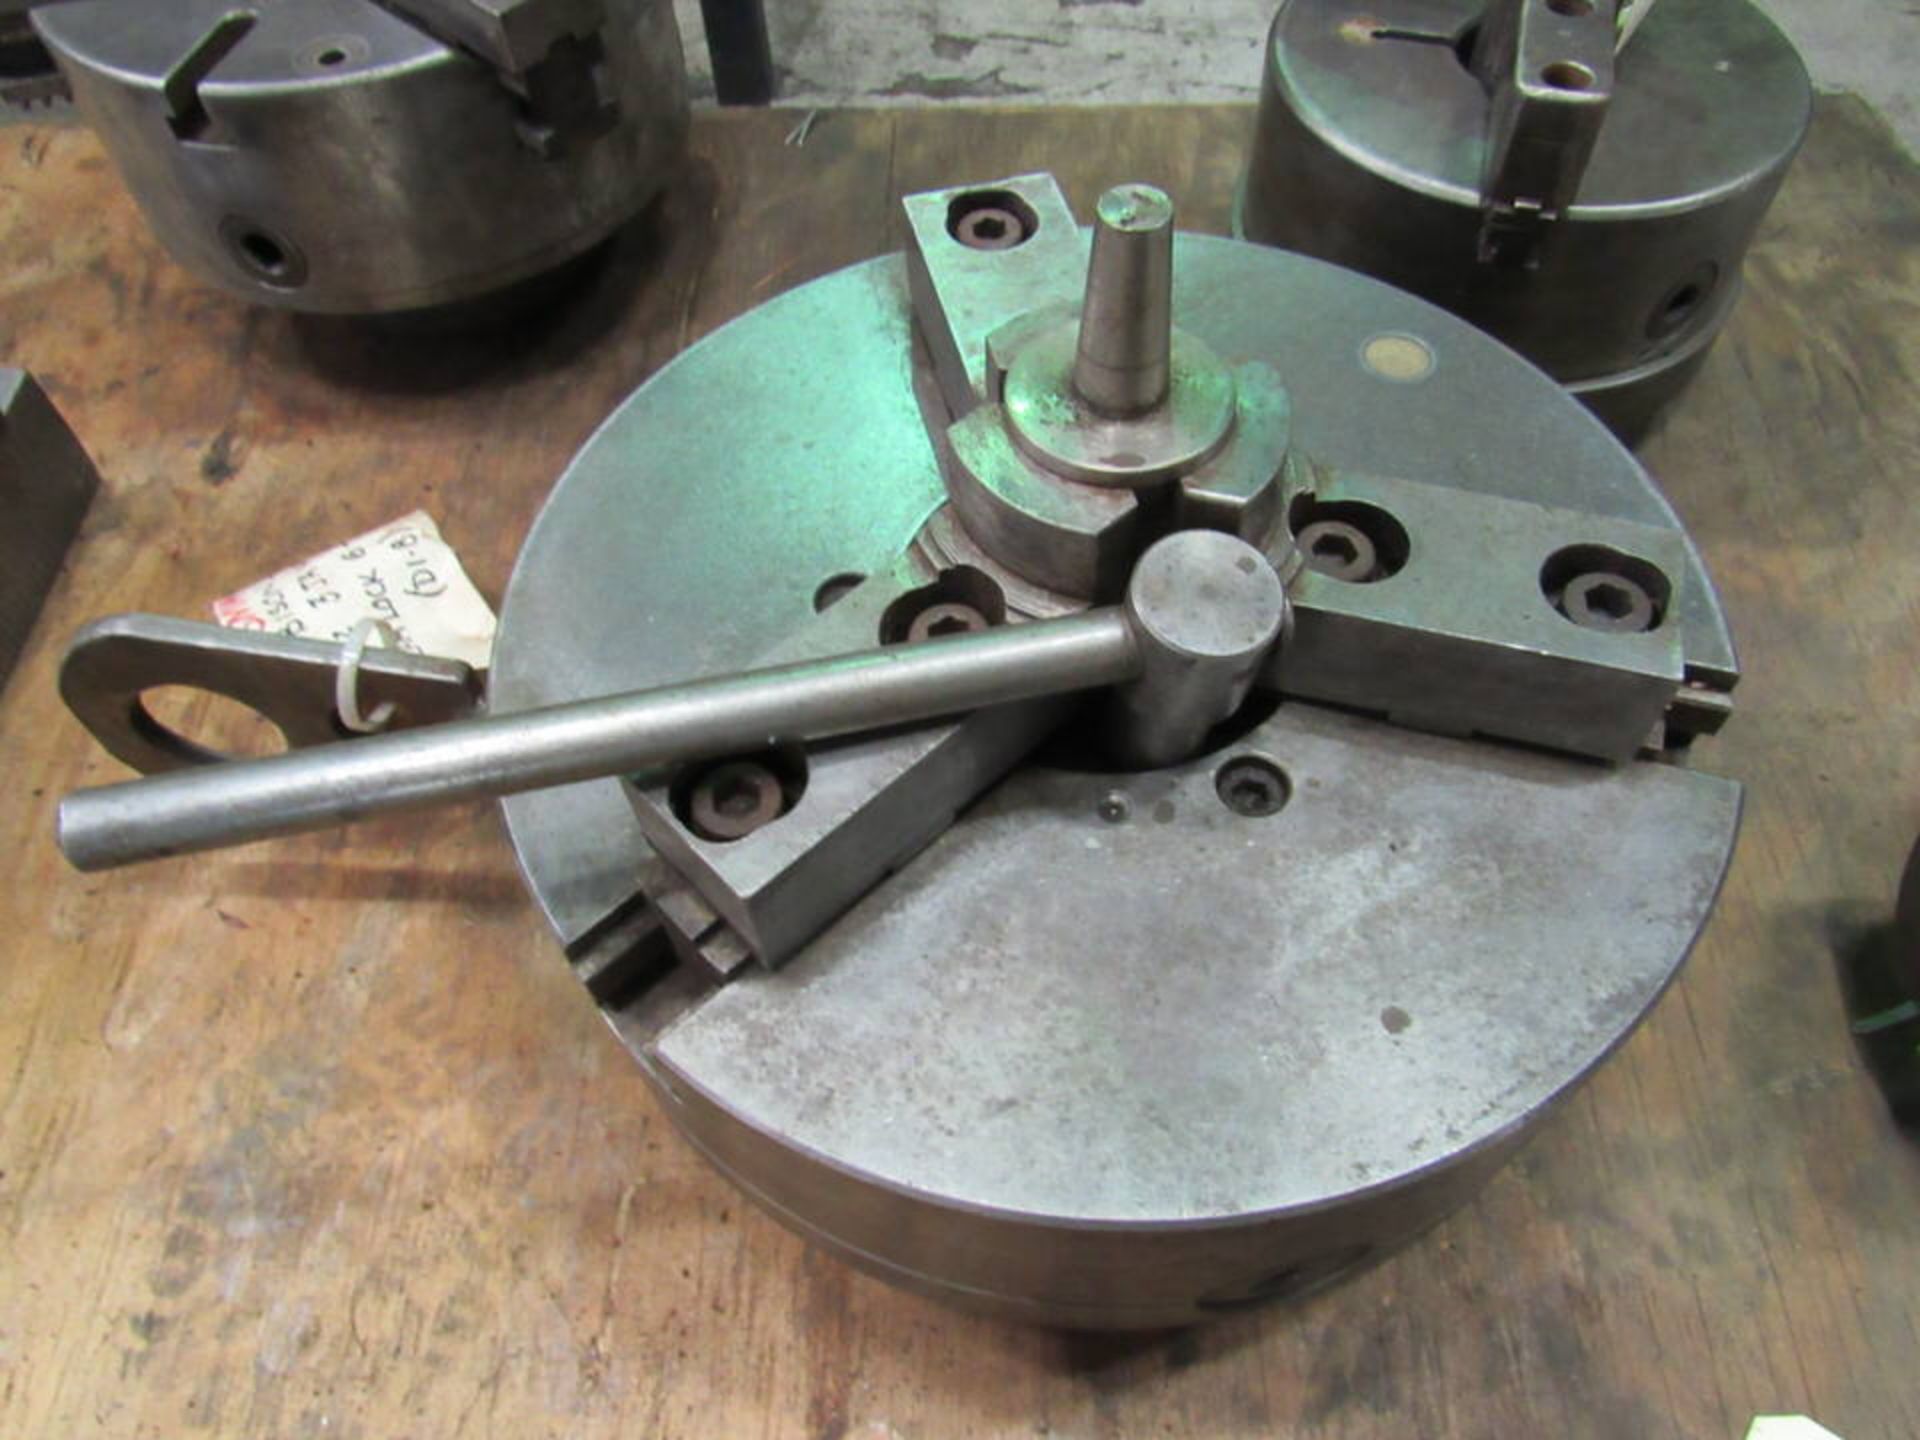 12.5" 3-Jaw Bison Chuck, 4" through hole, camlock 6 - 1" pin (D1-8), S/N NA (LOCATION: 3603 Melva - Image 2 of 3